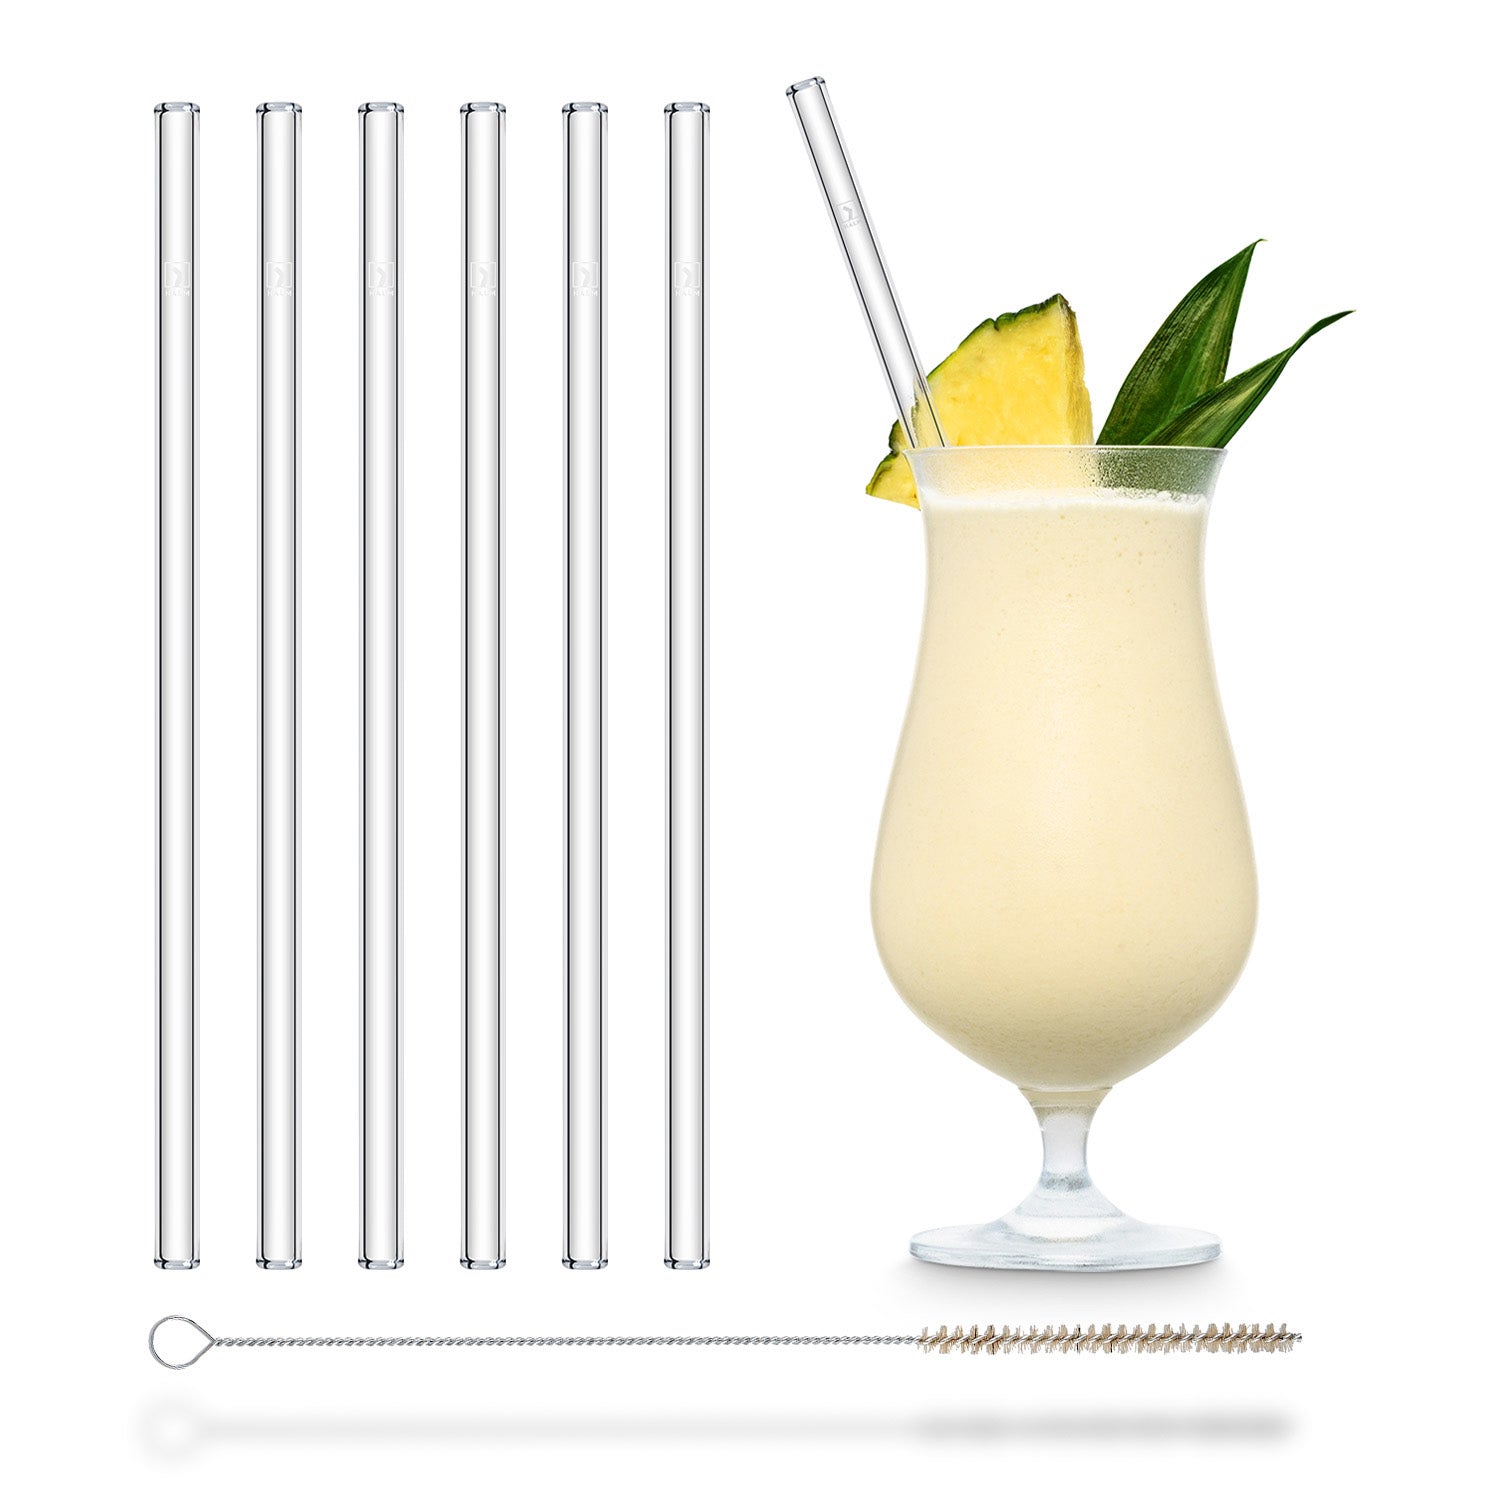 HALM Reusable Glass Straws 4 inch with plastic free brush - Set of